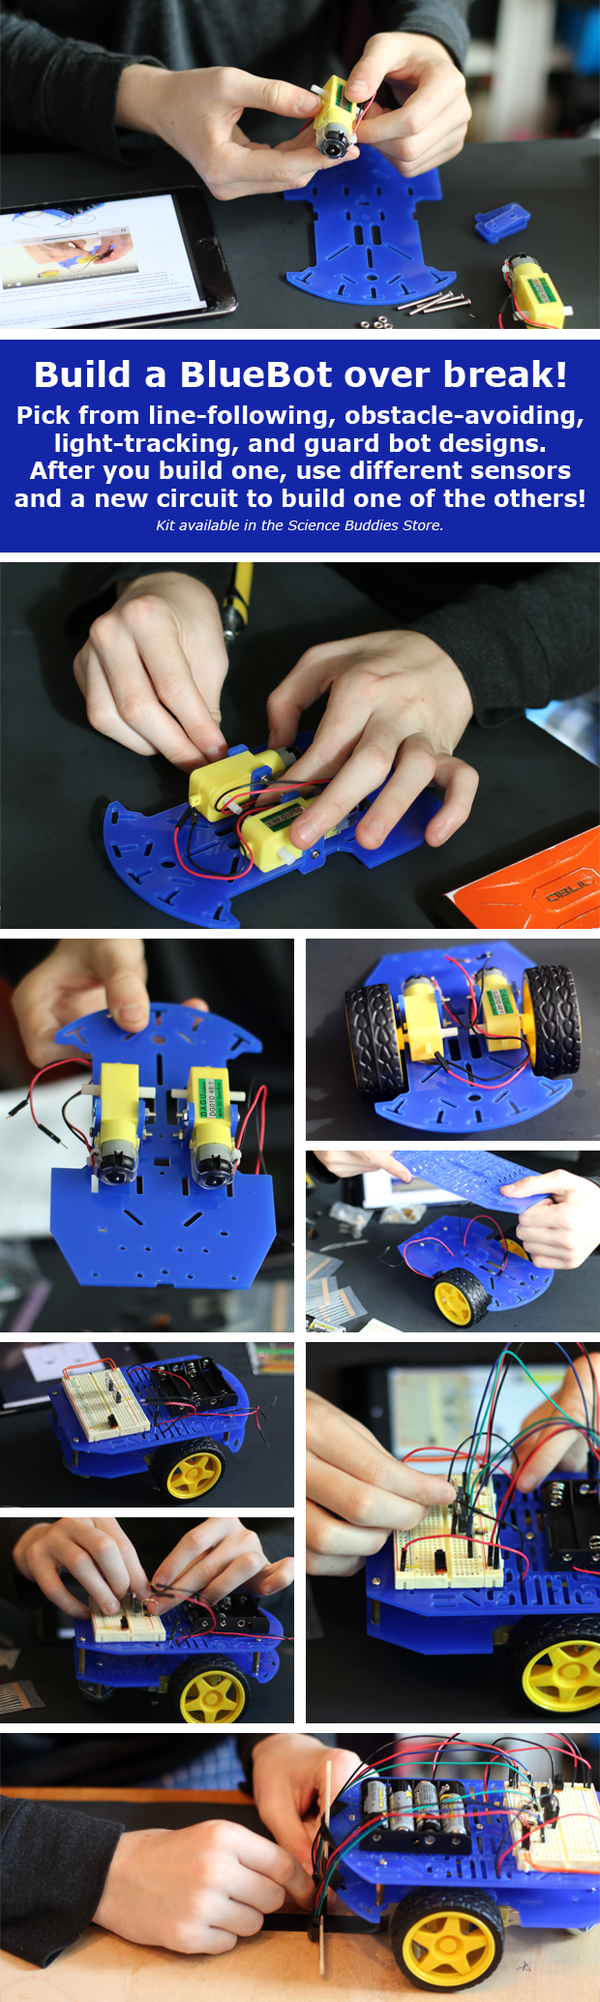 Build a BlueBot Over Break with the BlueBot: 4-in-1 Robotics Kit